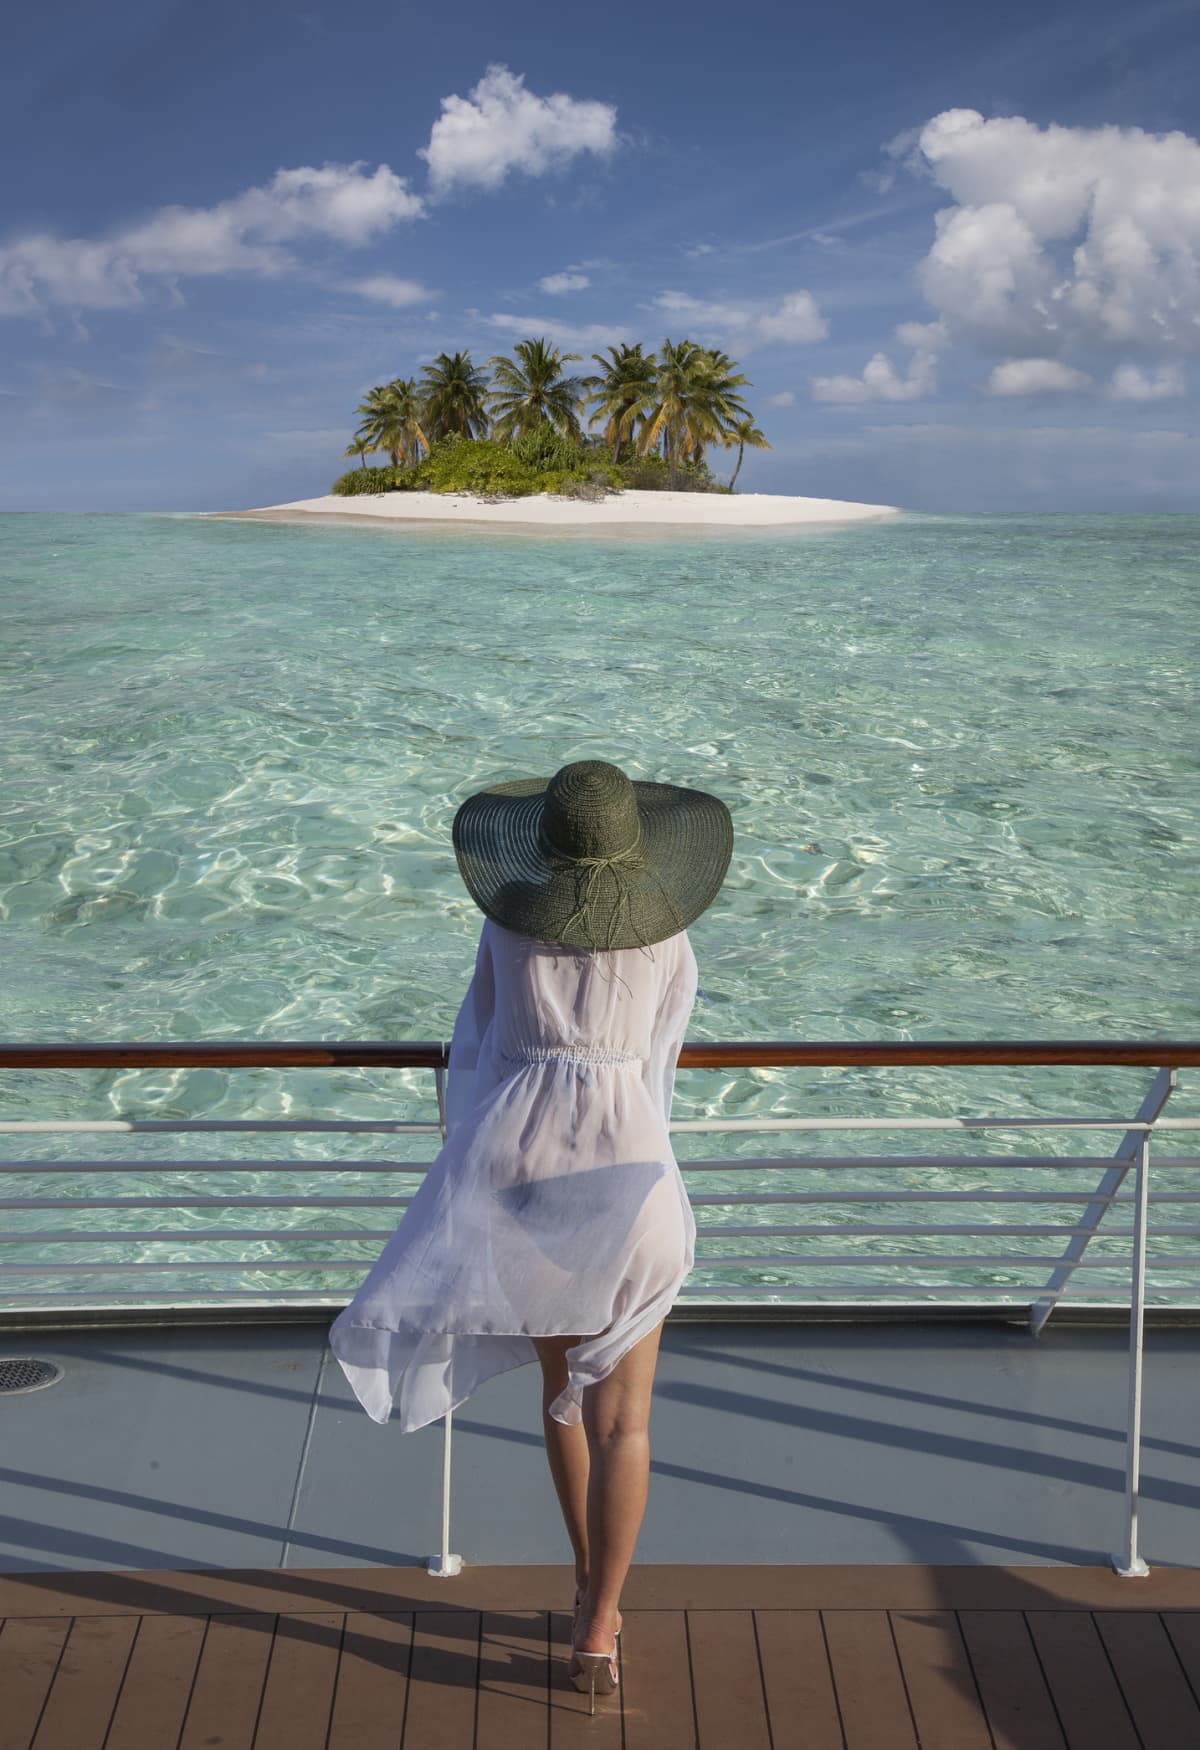 A young woman on the deck of a cruising ship watching a small island with white sands and coconut palms.